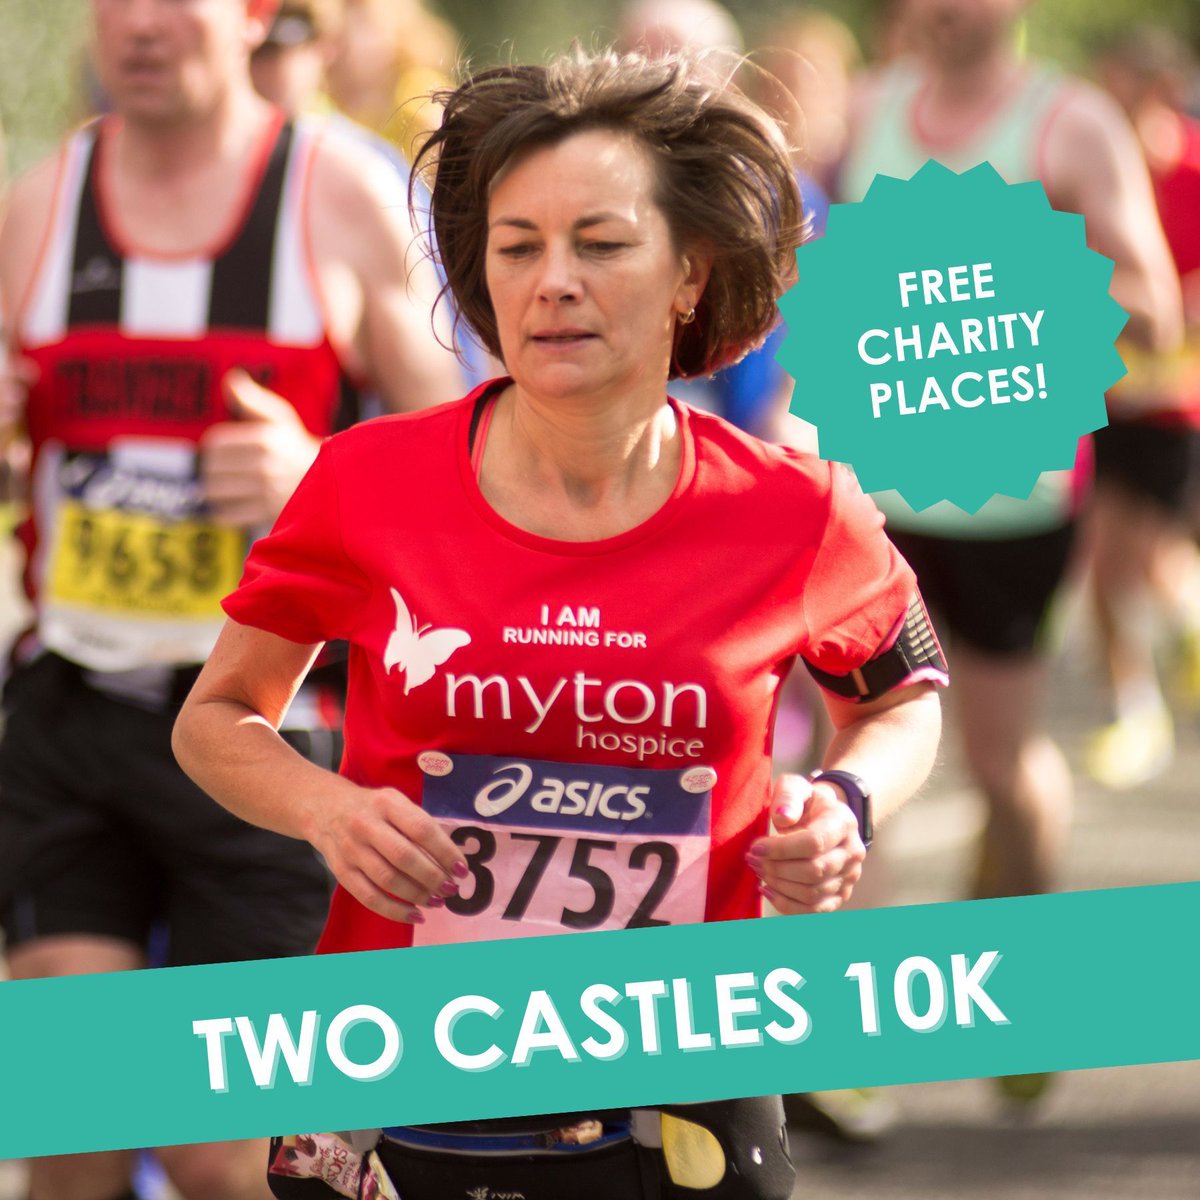 🚨TWO CASTLES 10K FREE CHARITY PLACES 🚨 #SUAHour Join #TeamMyton and take on the famous Two Castles 10K Run on Sunday 9th June, starting at the iconic Warwick Castle, run the distance to Kenilworth Castle! 🏃‍♂️ Find out more today buff.ly/4a1T0L0